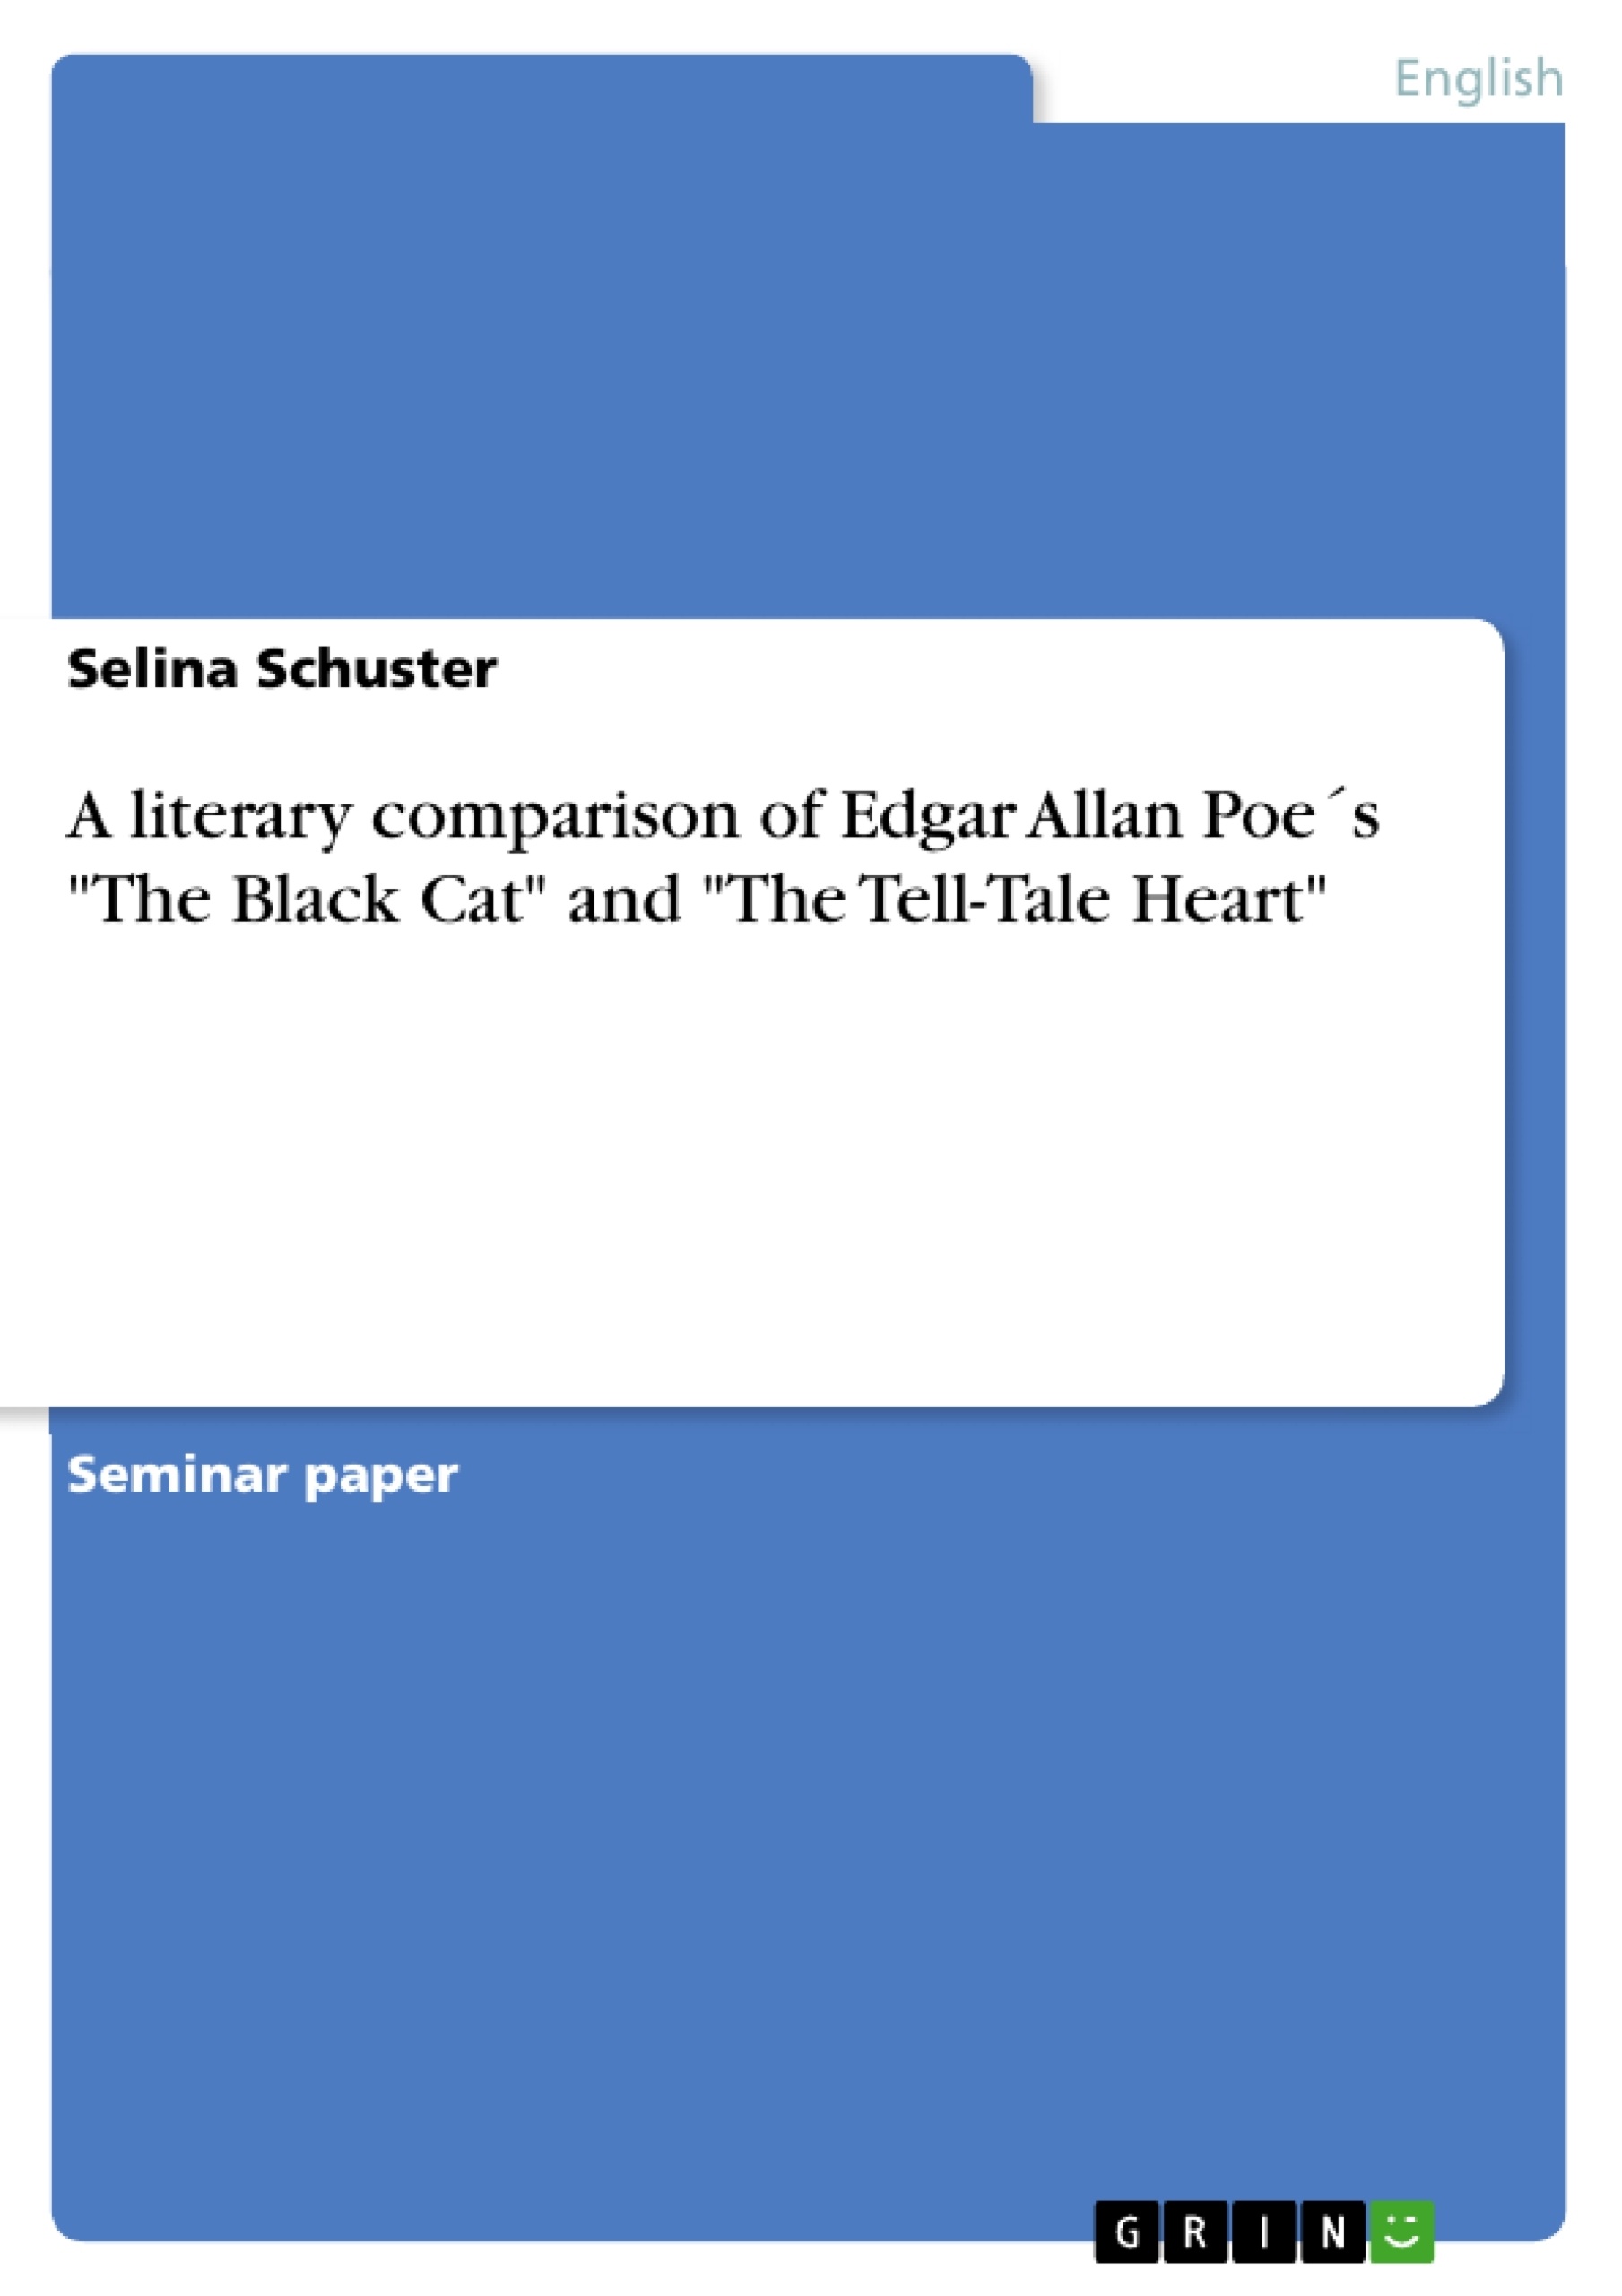 Writing my research paper comparing tell tale heart and the black cat